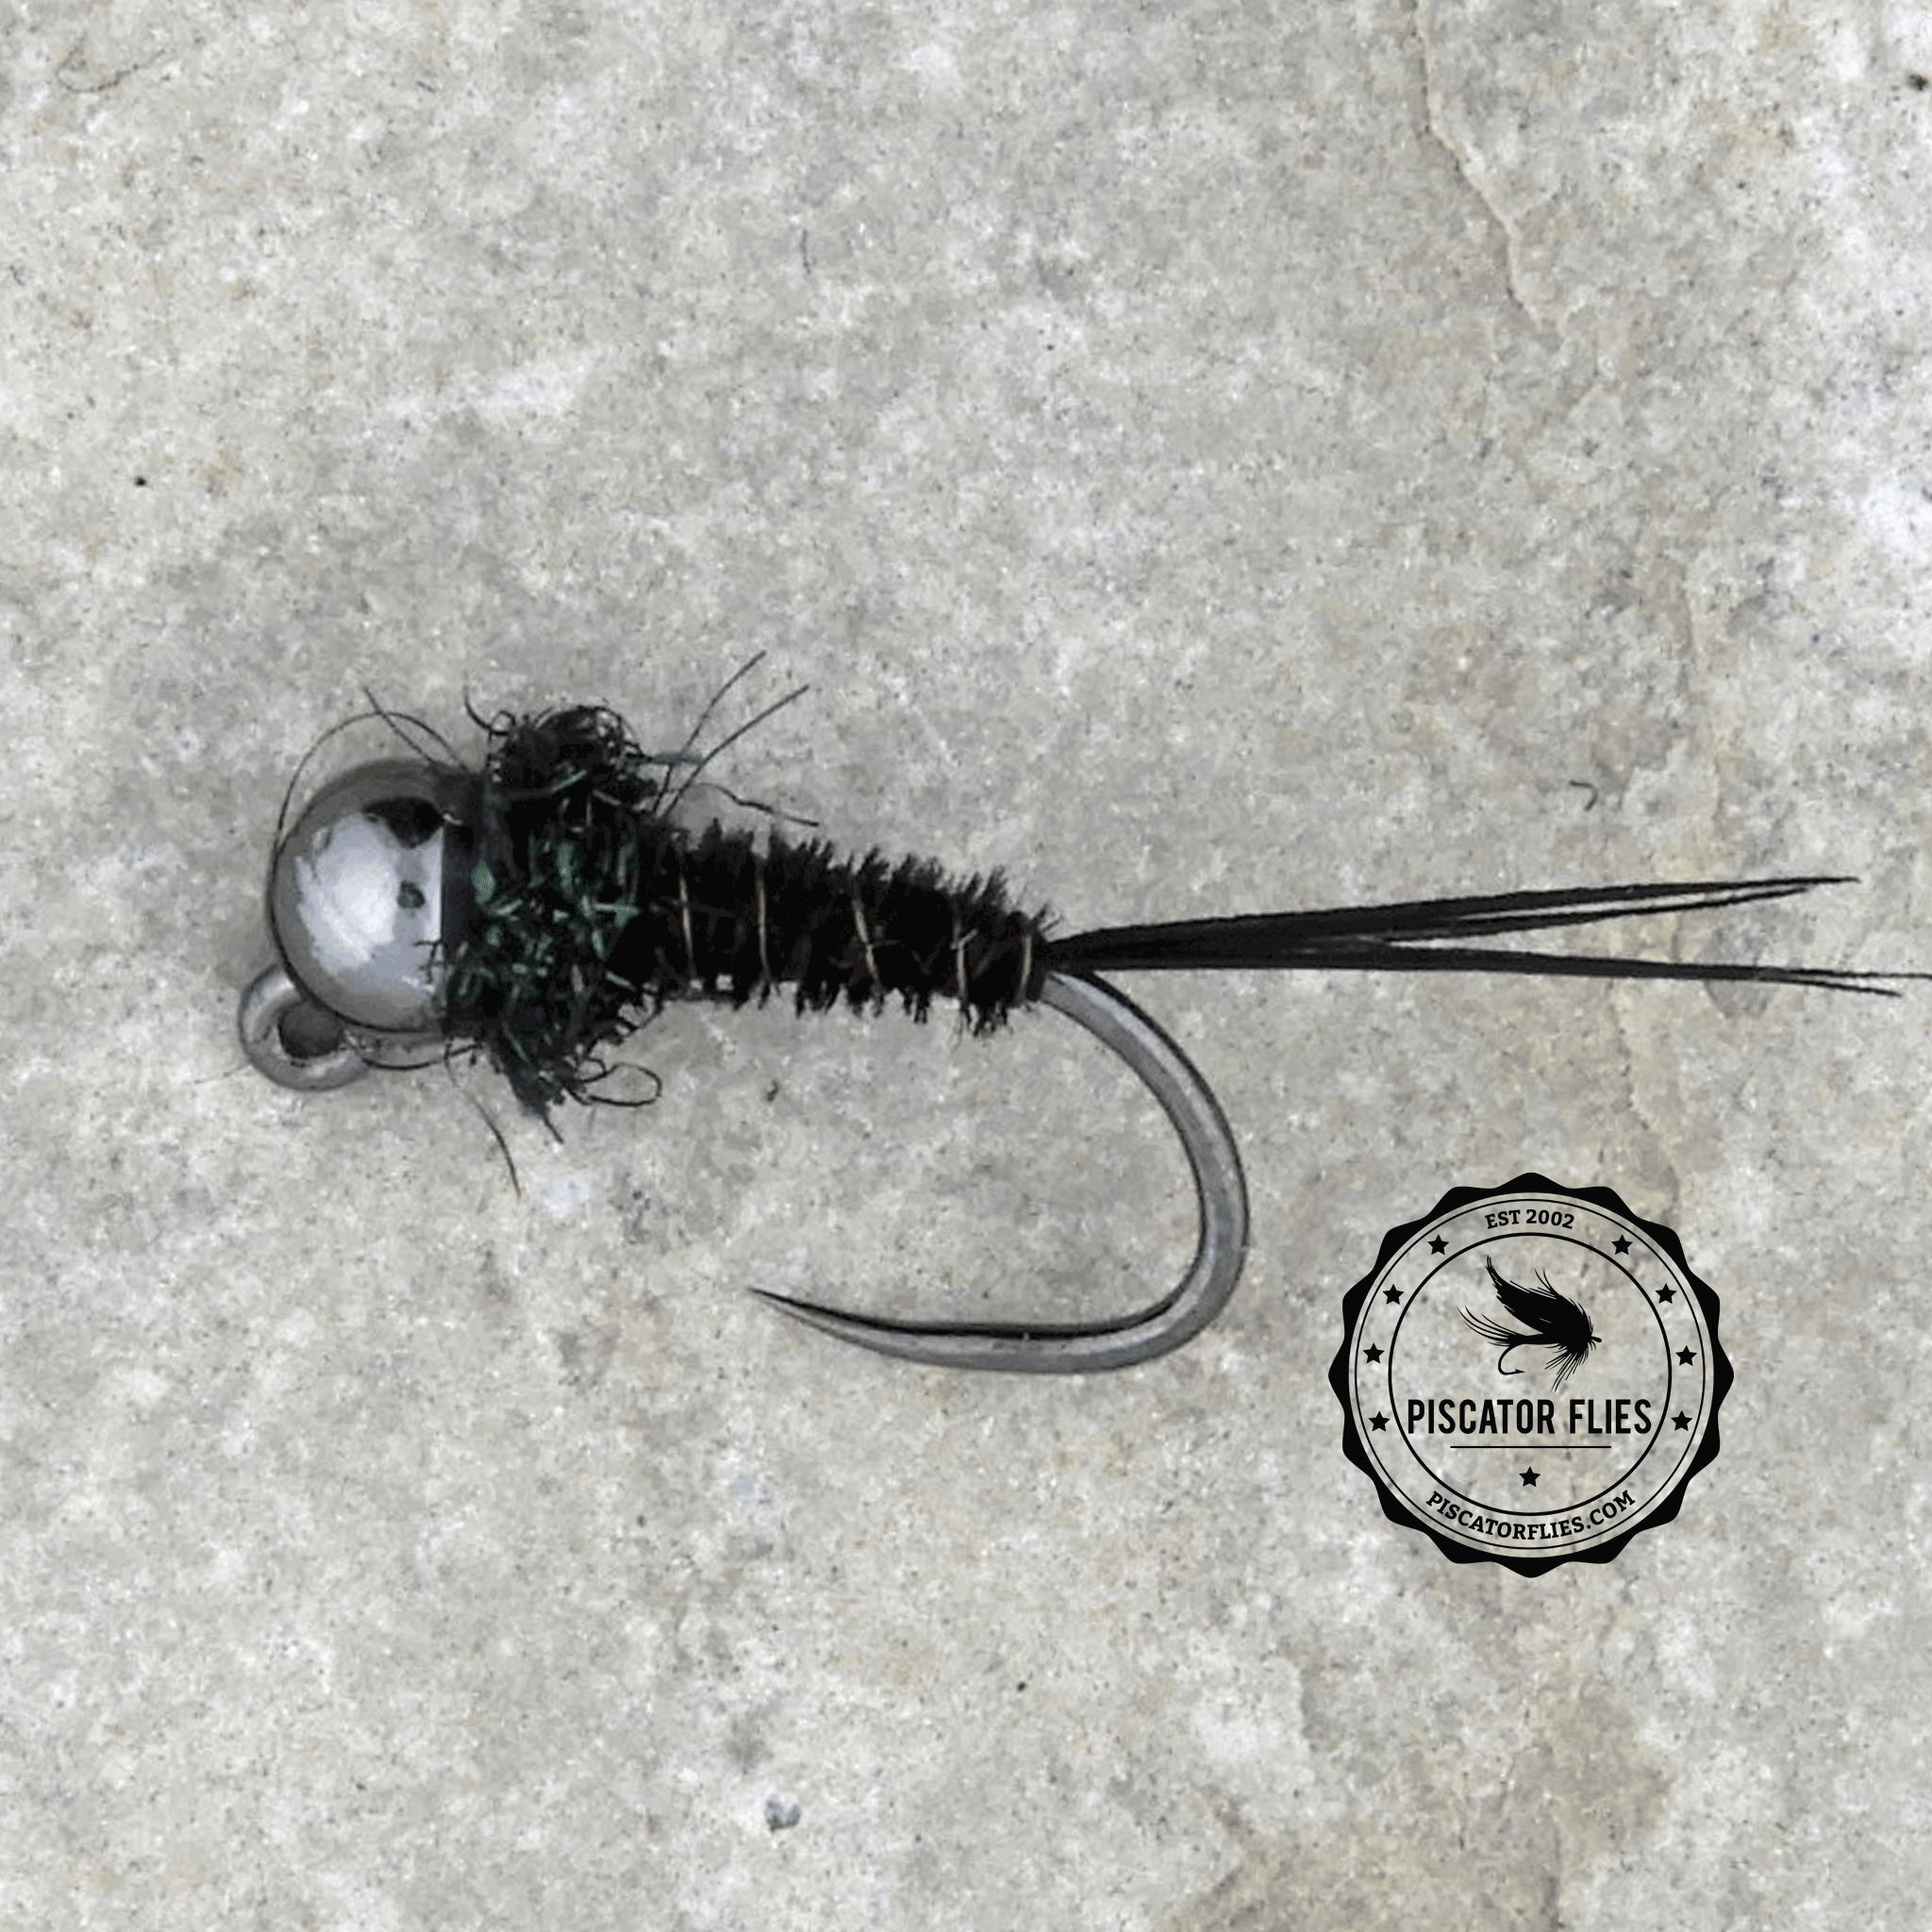 Tungsten Jig Nymphs, Nymphs for Sale